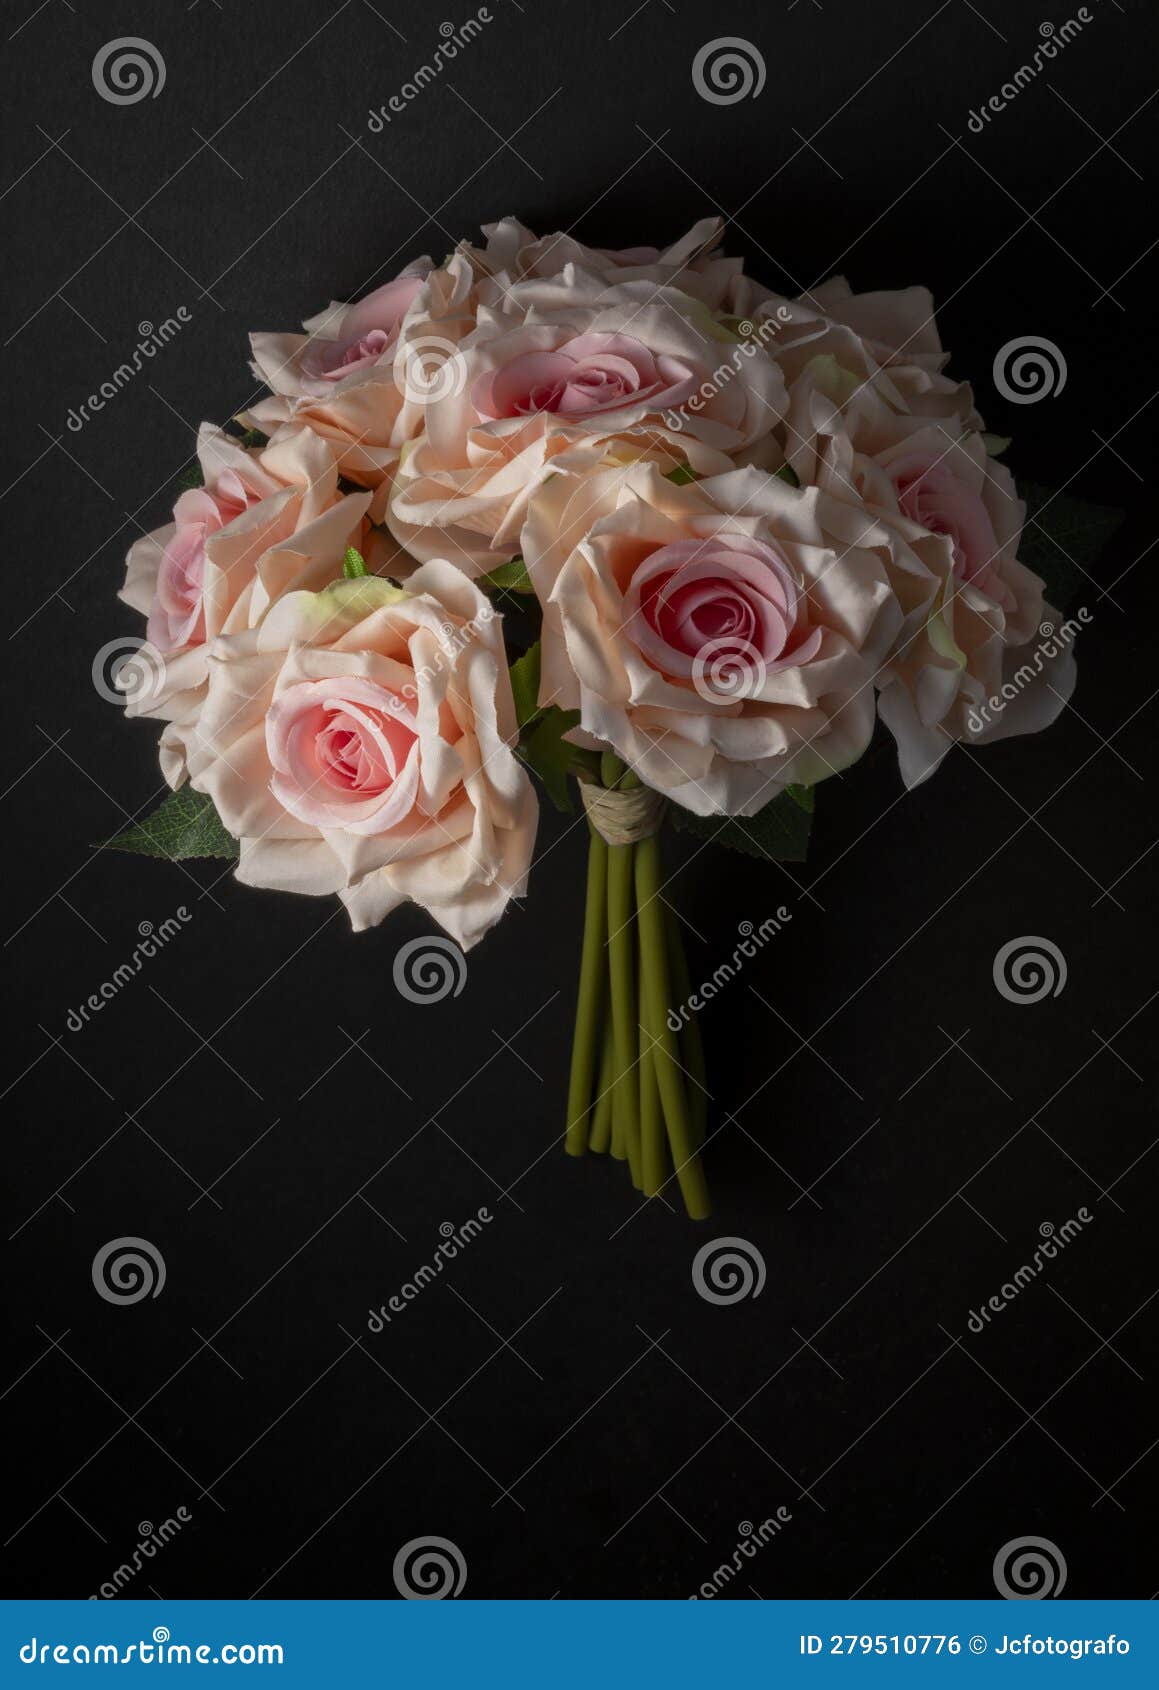 floral ornament of white roses on a black background